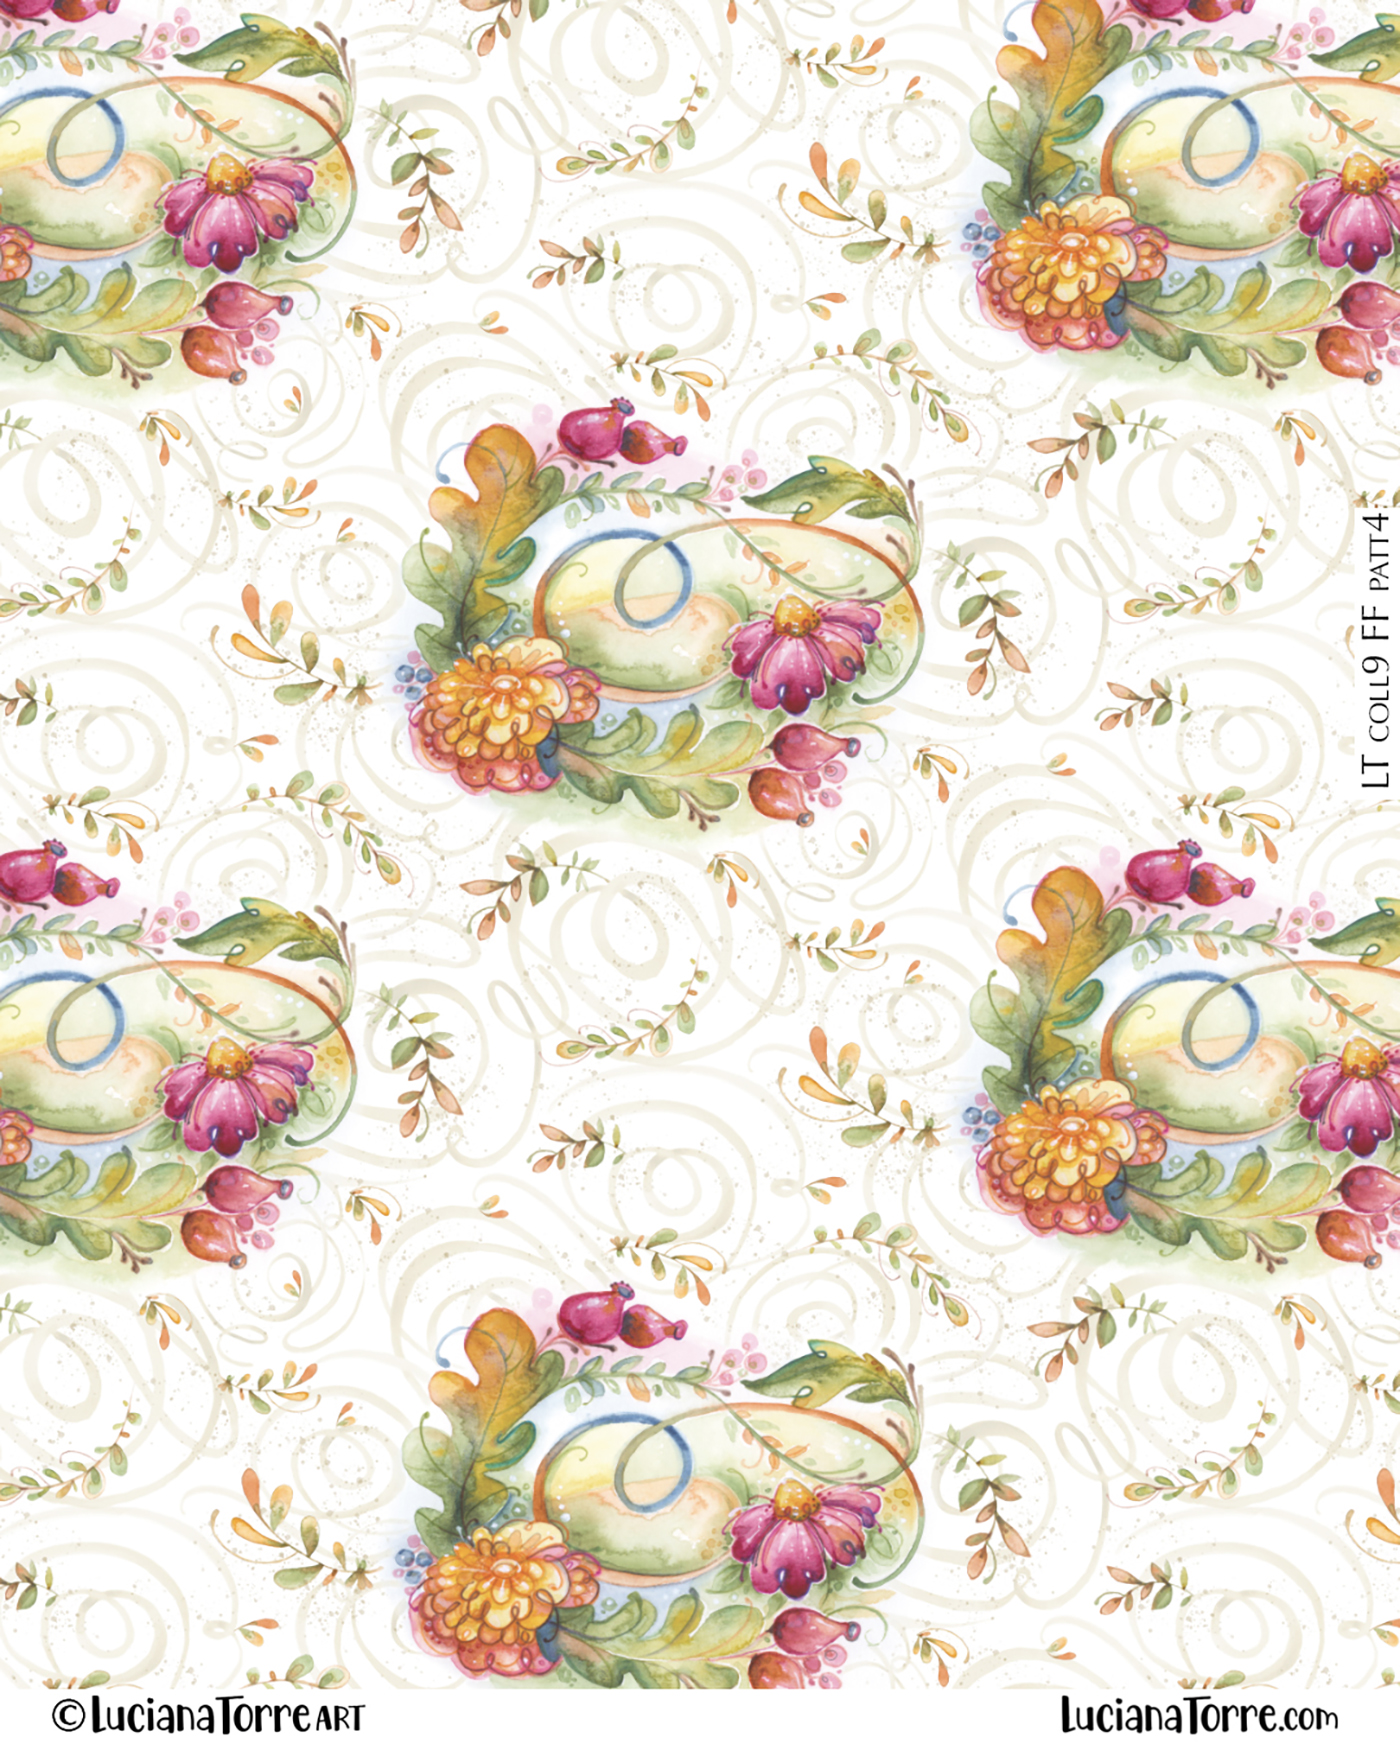 bohemian fall flowers pastel design in earthy green and ocher brown with golden yellow chrysanthemum and pink daisies with falling leaves and rose hip berries. Feminine bouquet of autumn florals pattern repeat hand painted in watercolours by floral artist Luciana Torre Art